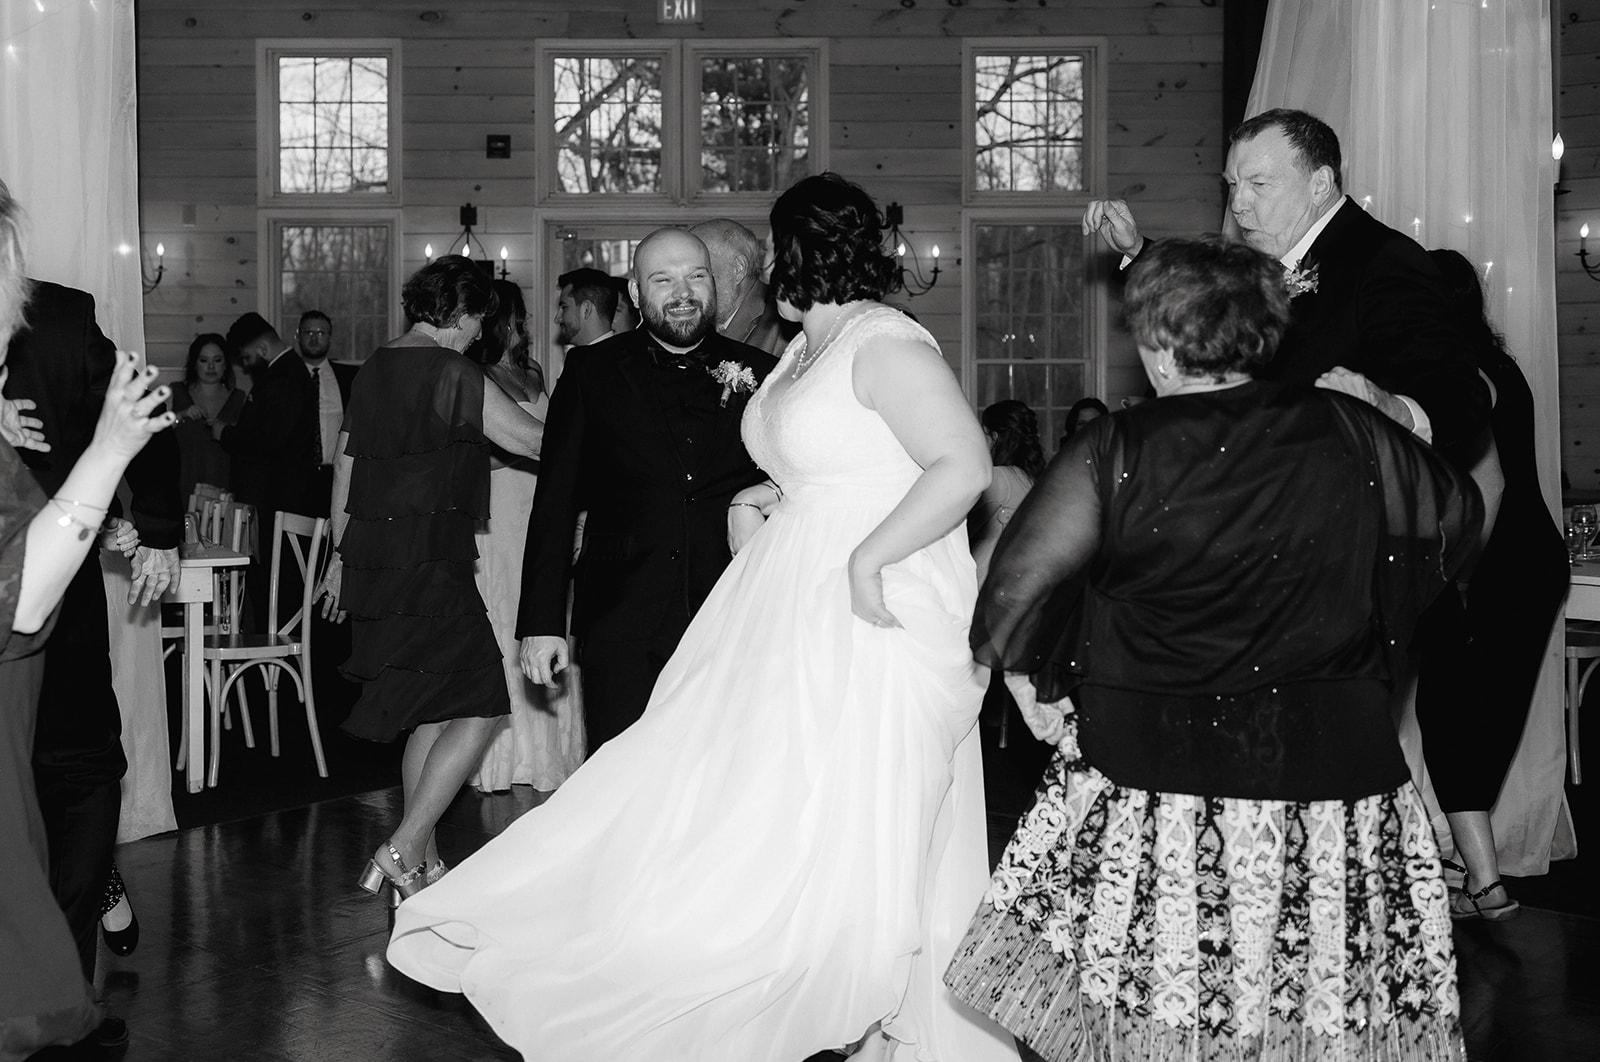 Bride and groom dance surrounded by their wedding guests